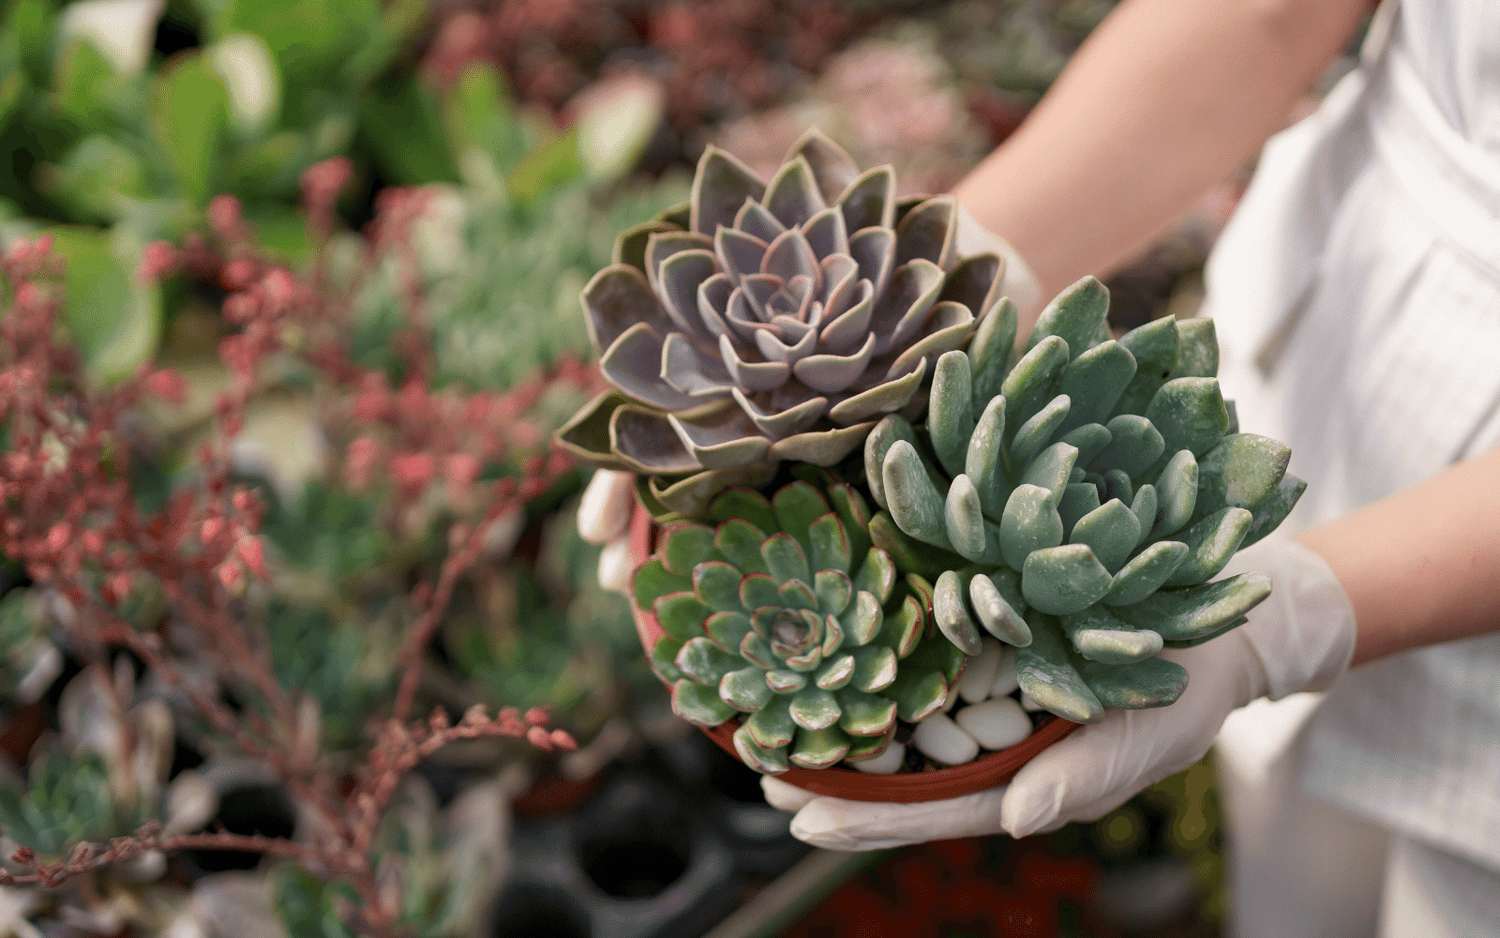 How to Care for Your Echeveria